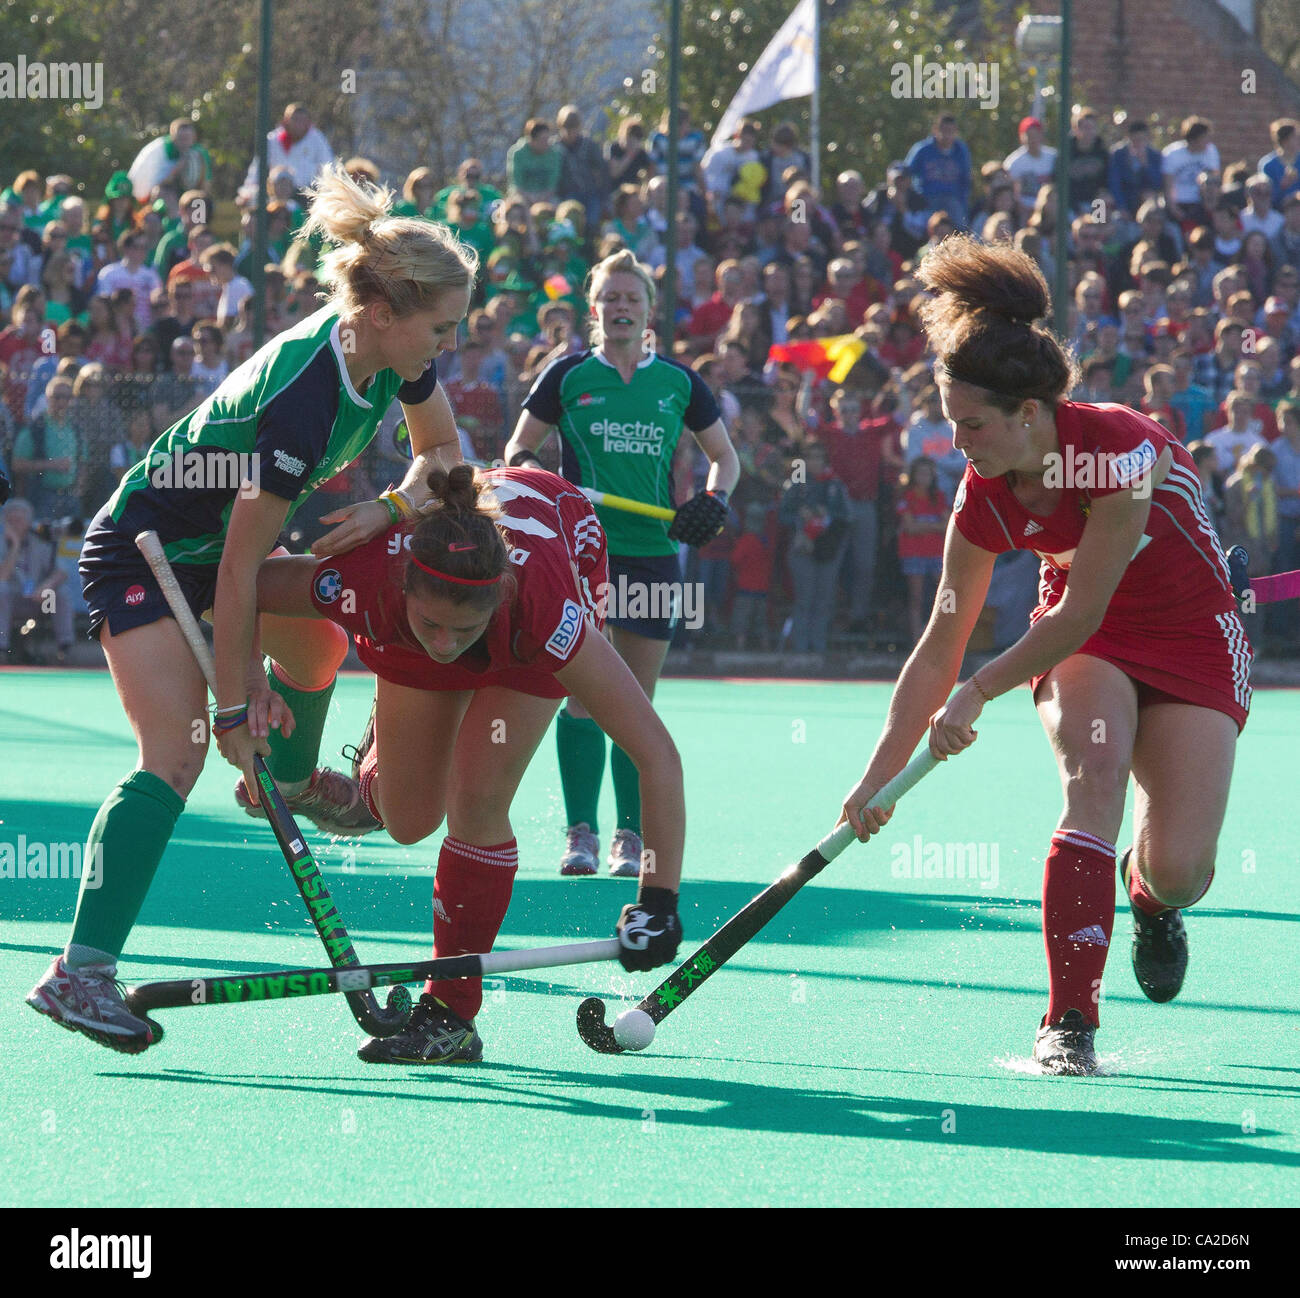 25.03.2012 - Kontich, Belgium - Pictured at the final of the Womens Hockey Olympic Qualifying Tournament between Ireland and Belgium. A tussle for the ball between Irelands Nicola Daly and Stephanie De Groof and Anouk Raes of Belgium. Stock Photo